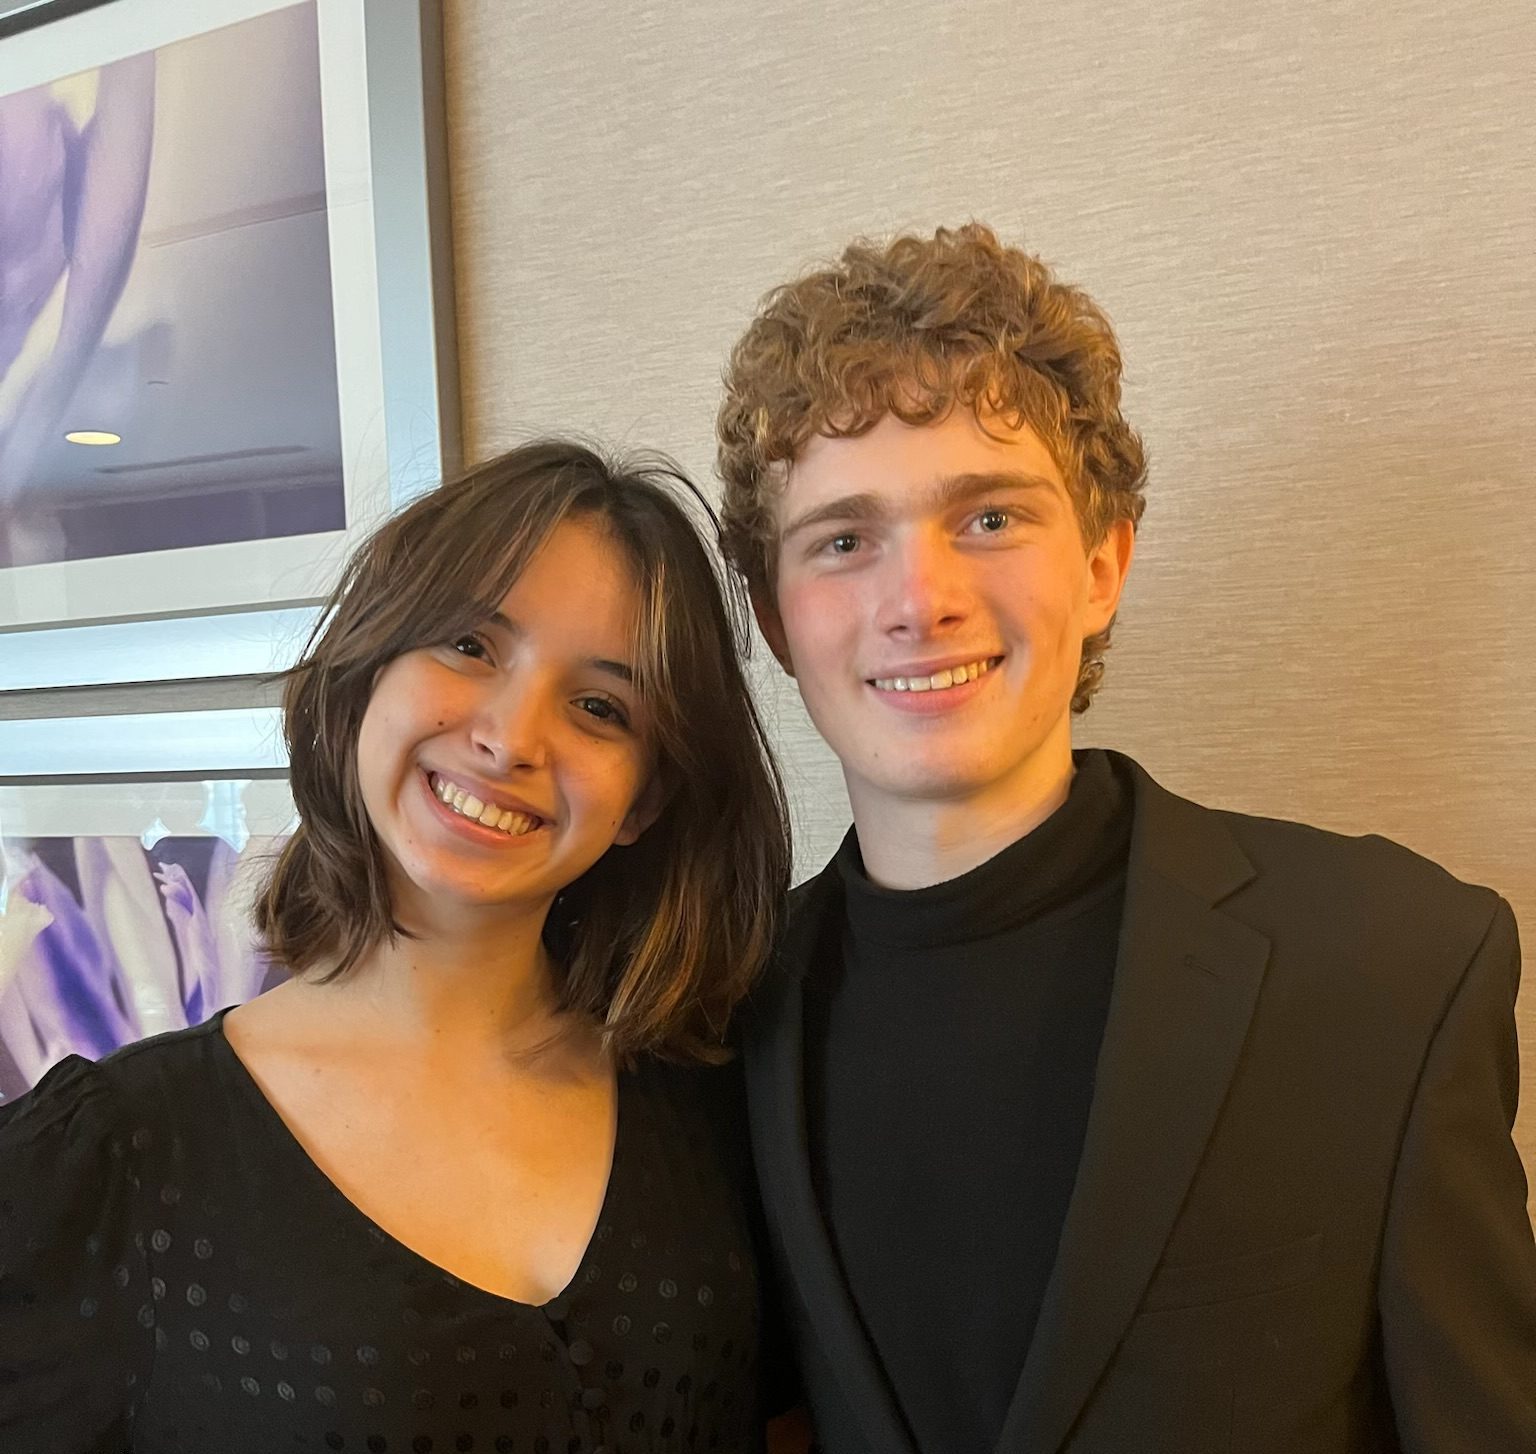 Camila Chandler and her partner Aiden Gross after their Independent Event duet scene. Although Chandler had to wear all black, she tried to resemble her character Jo as much as possible.